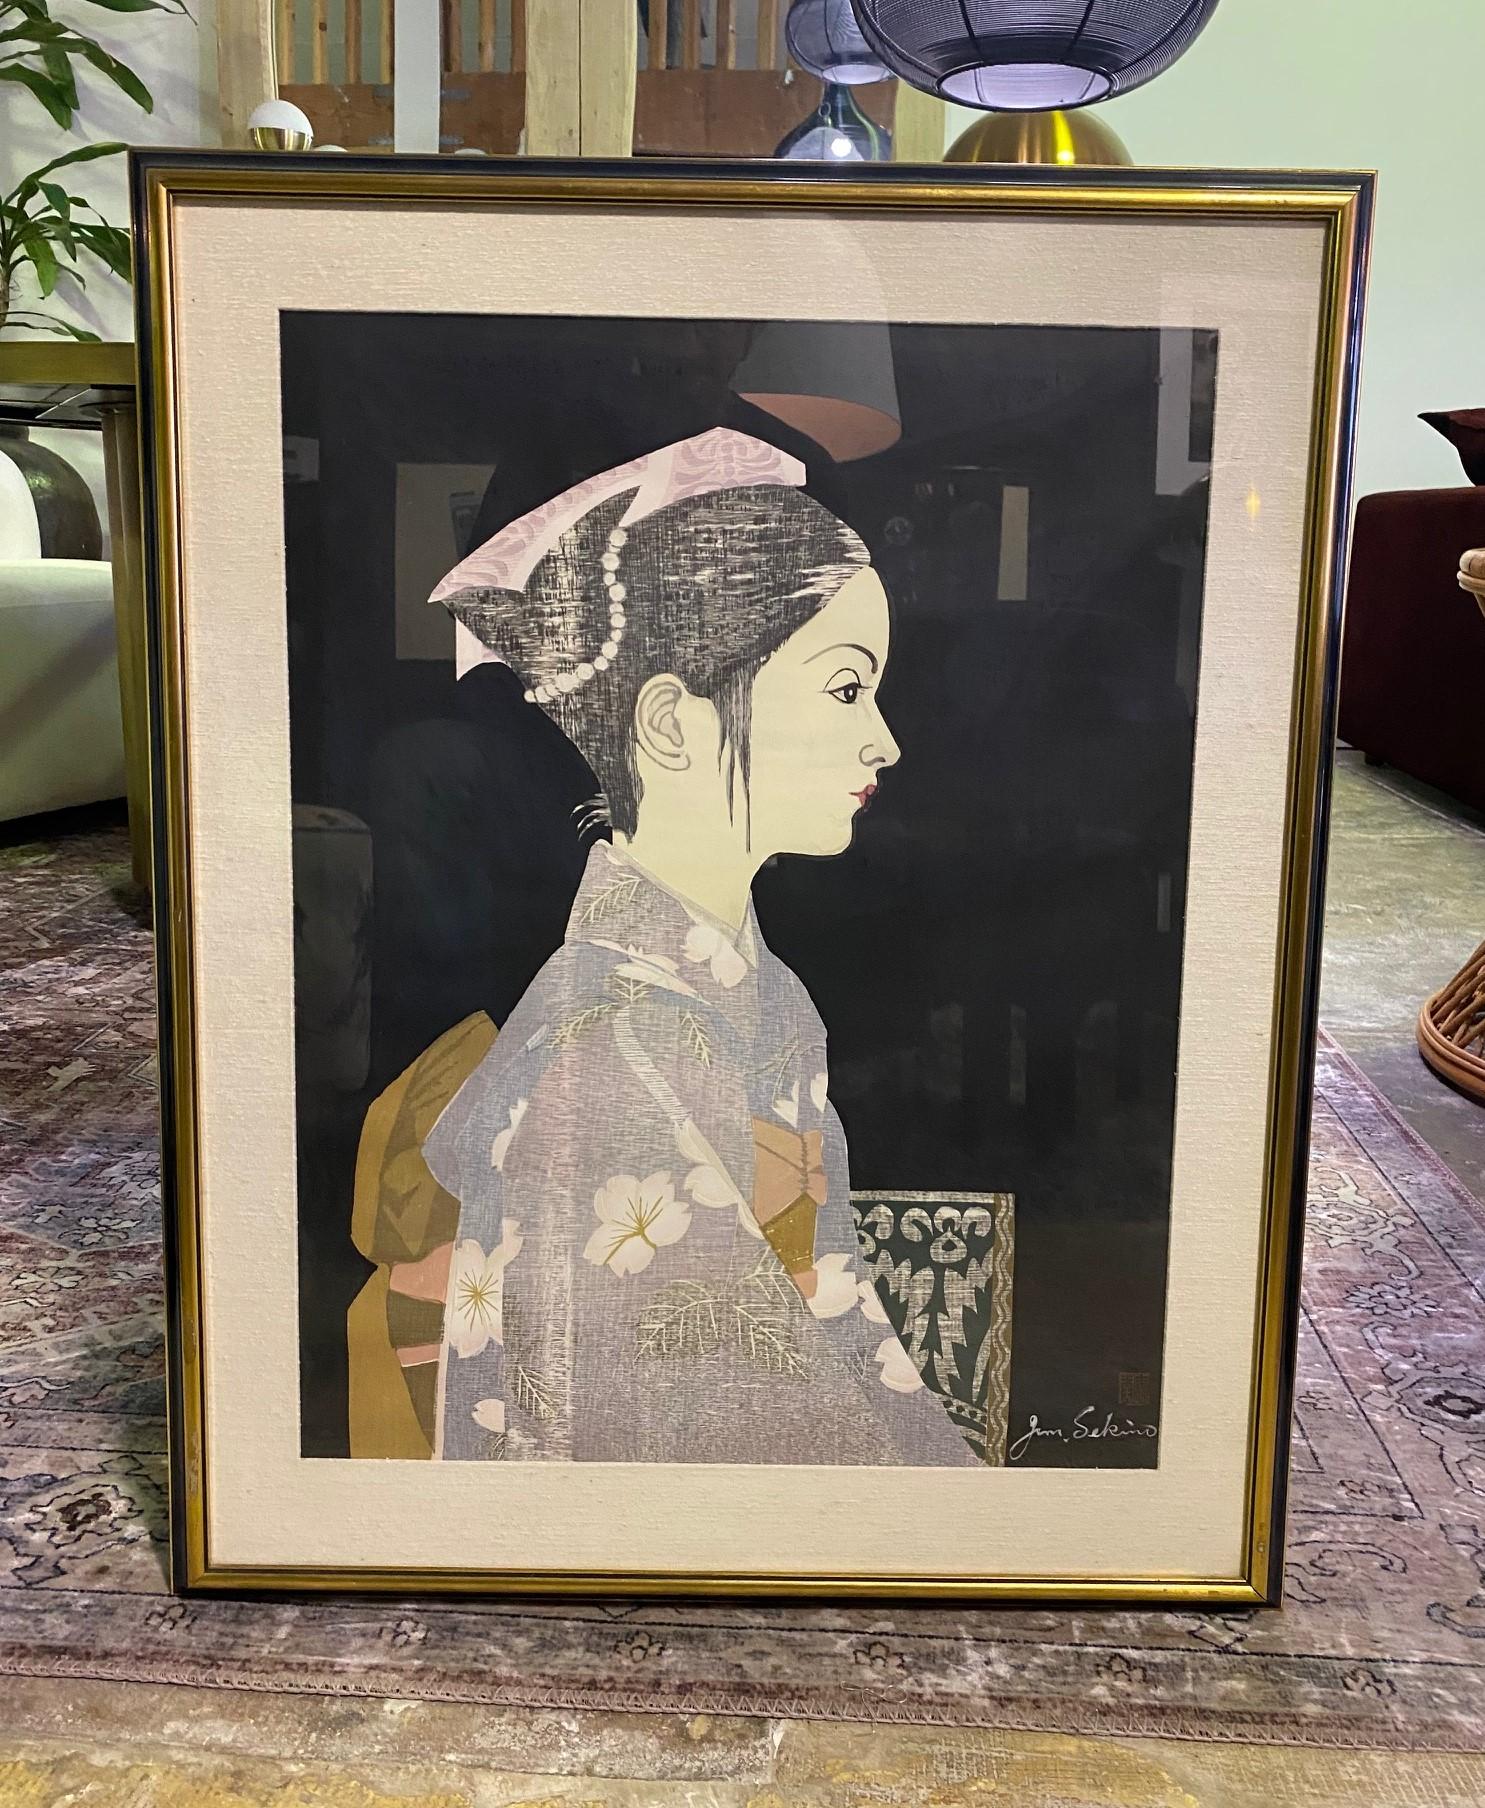 A wonderfully composed and colored, limited edition woodblock print by famed Japanese artist Junichiro Sekino.

This print, which is titled 